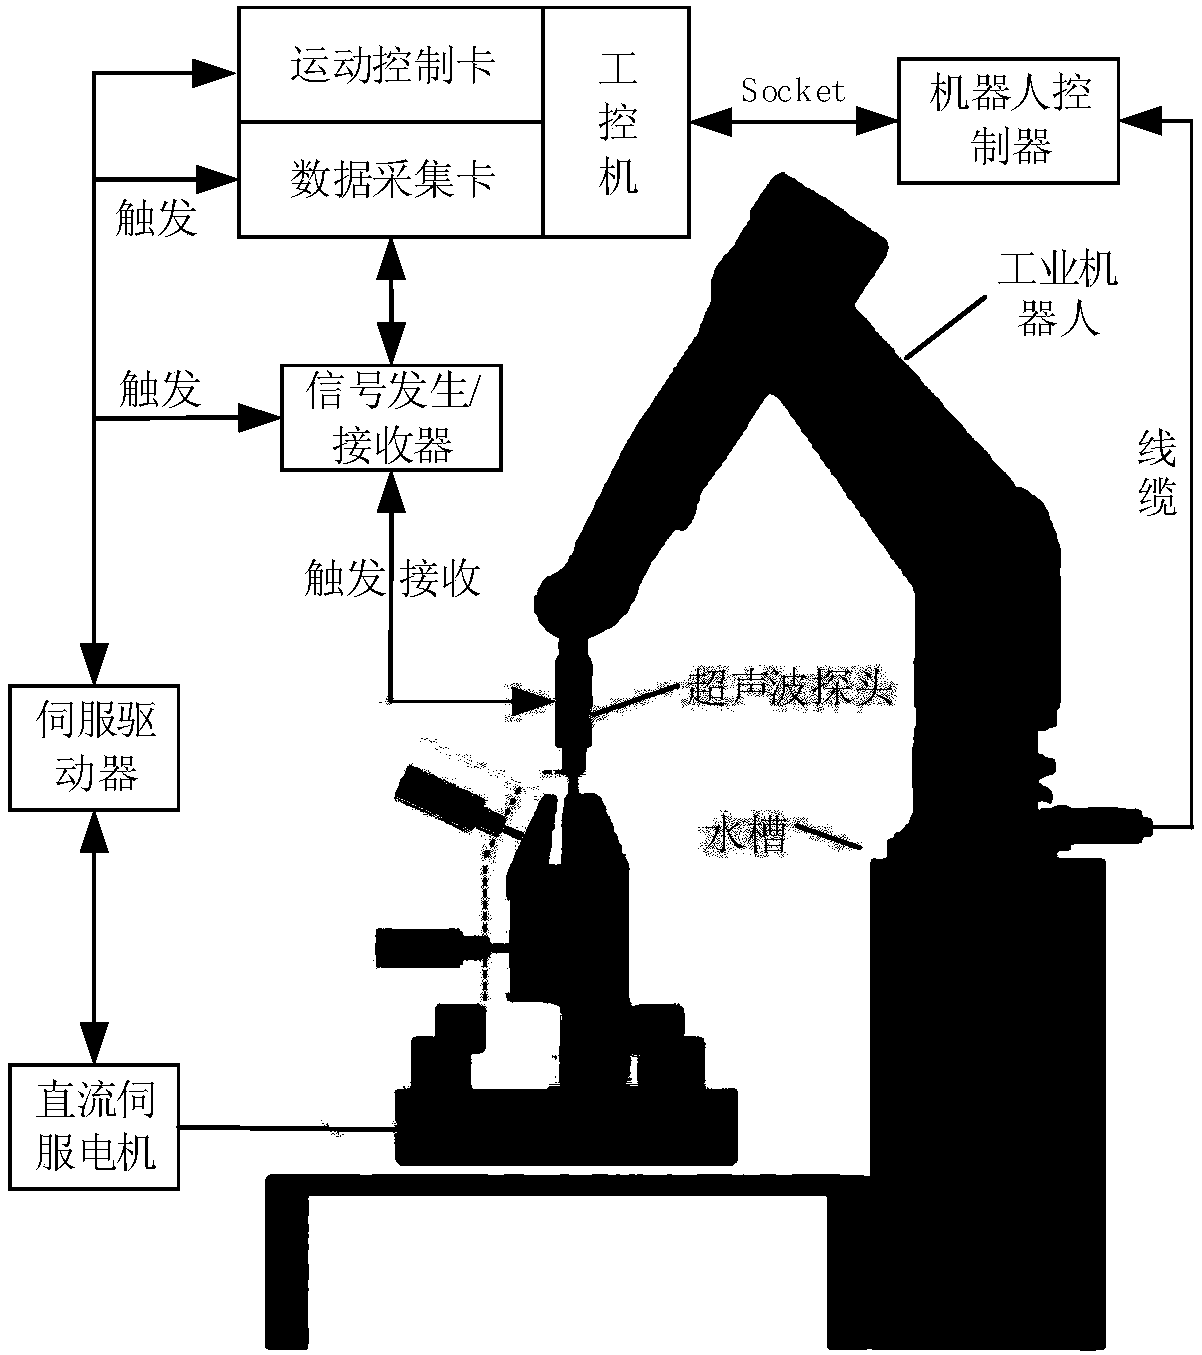 Ultrasonic automatic detection method capable of considering workpiece clamping error correction